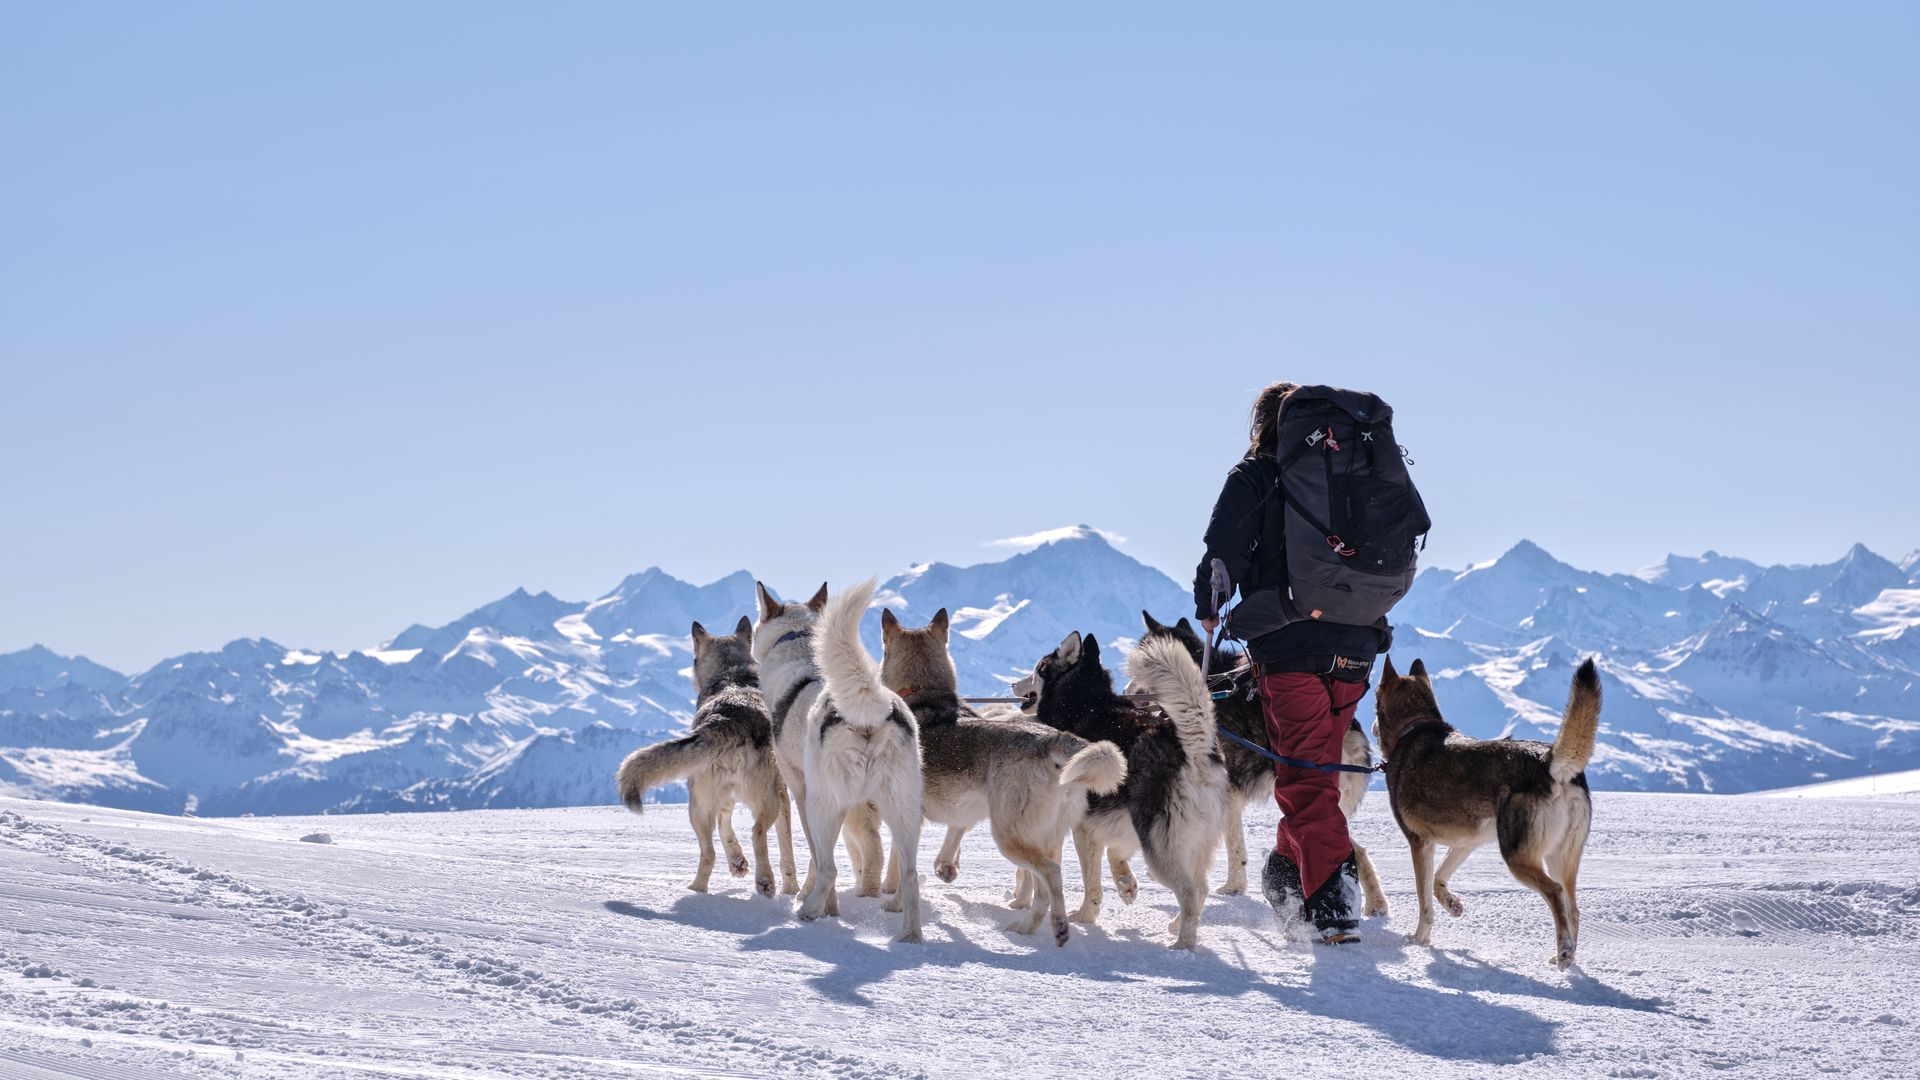 The musher and her 6 sled dogs at Glacier 3000 in Les Diablerets, seen from behind.